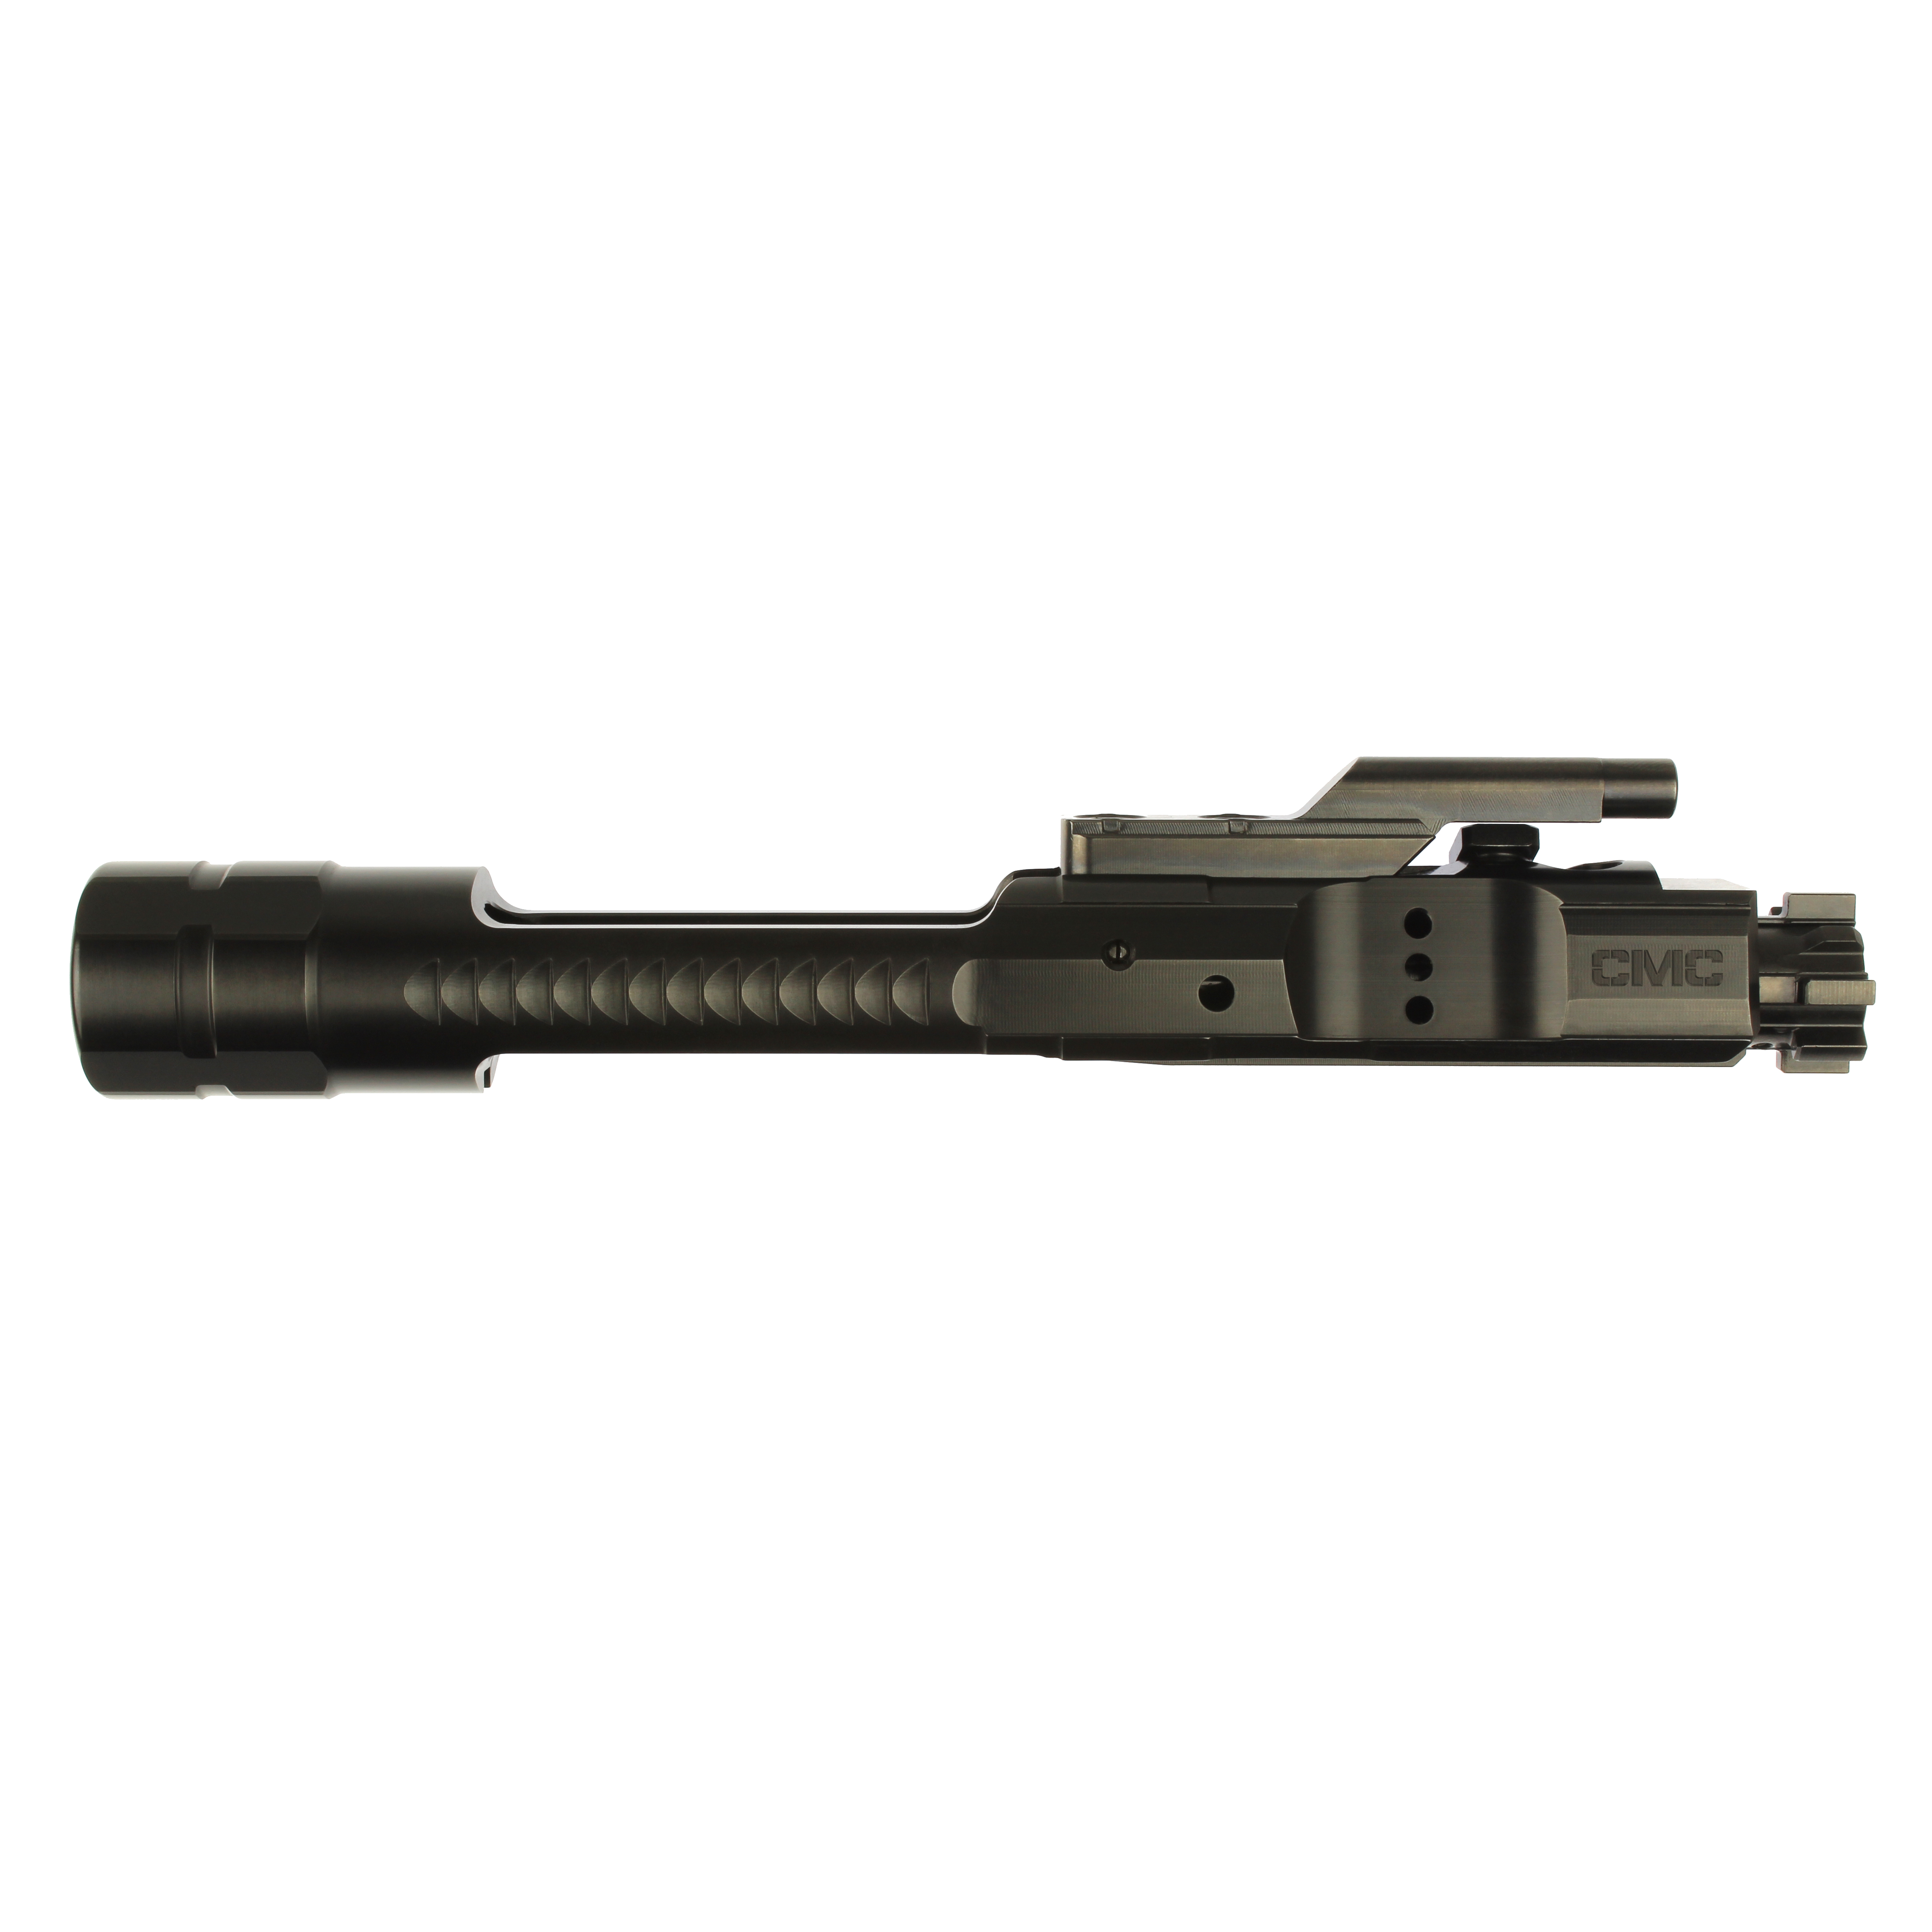 The CMC Triggers Enhanced Bolt Carrier Group is designed for shooters who d...